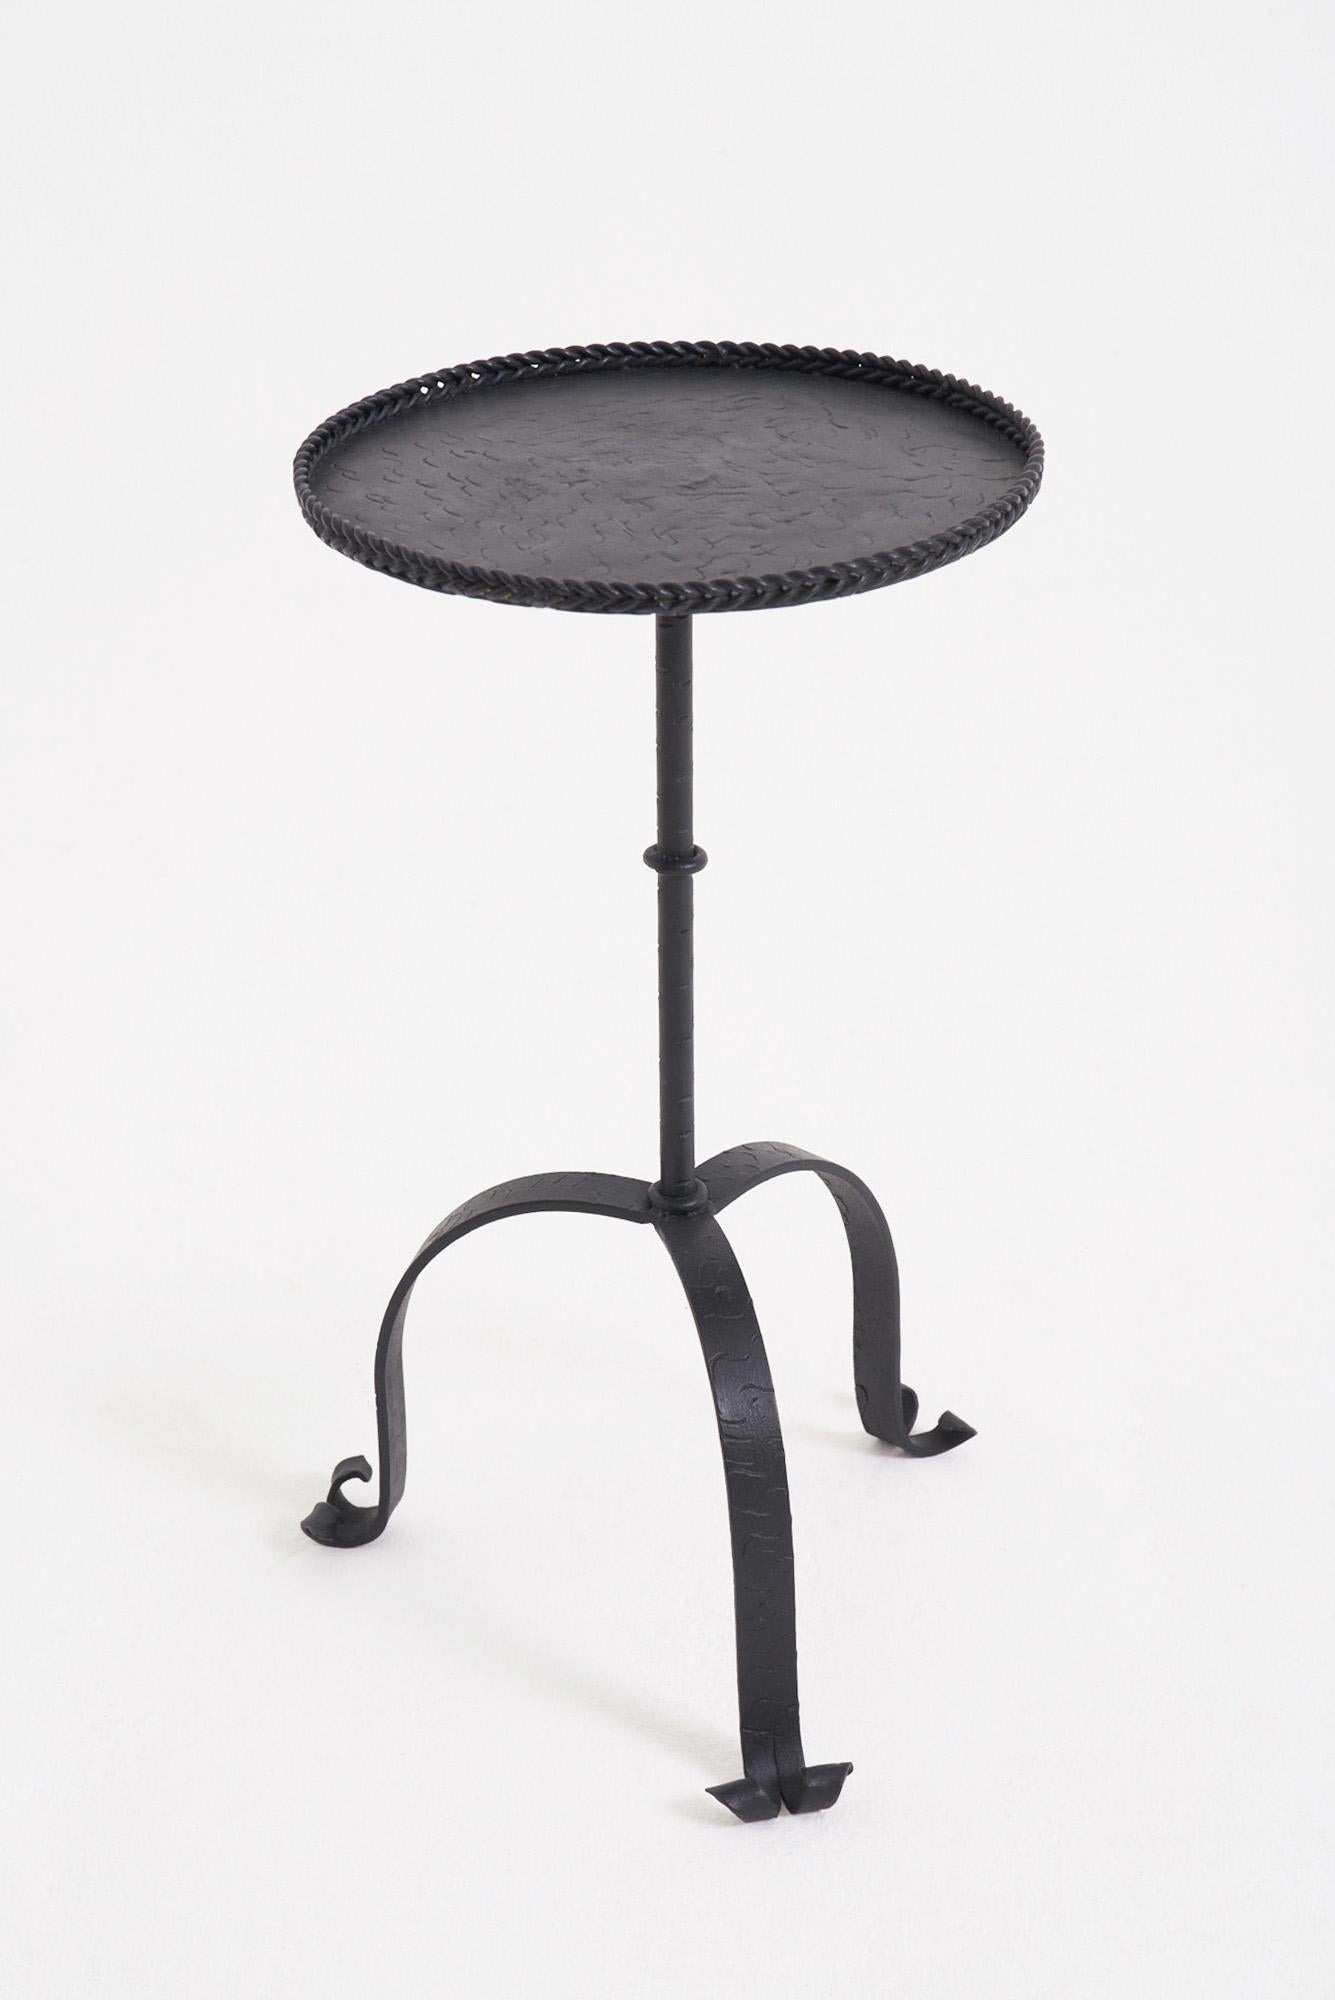 A wrought iron black enamelled martini table
Spain, second half of the 20th Century